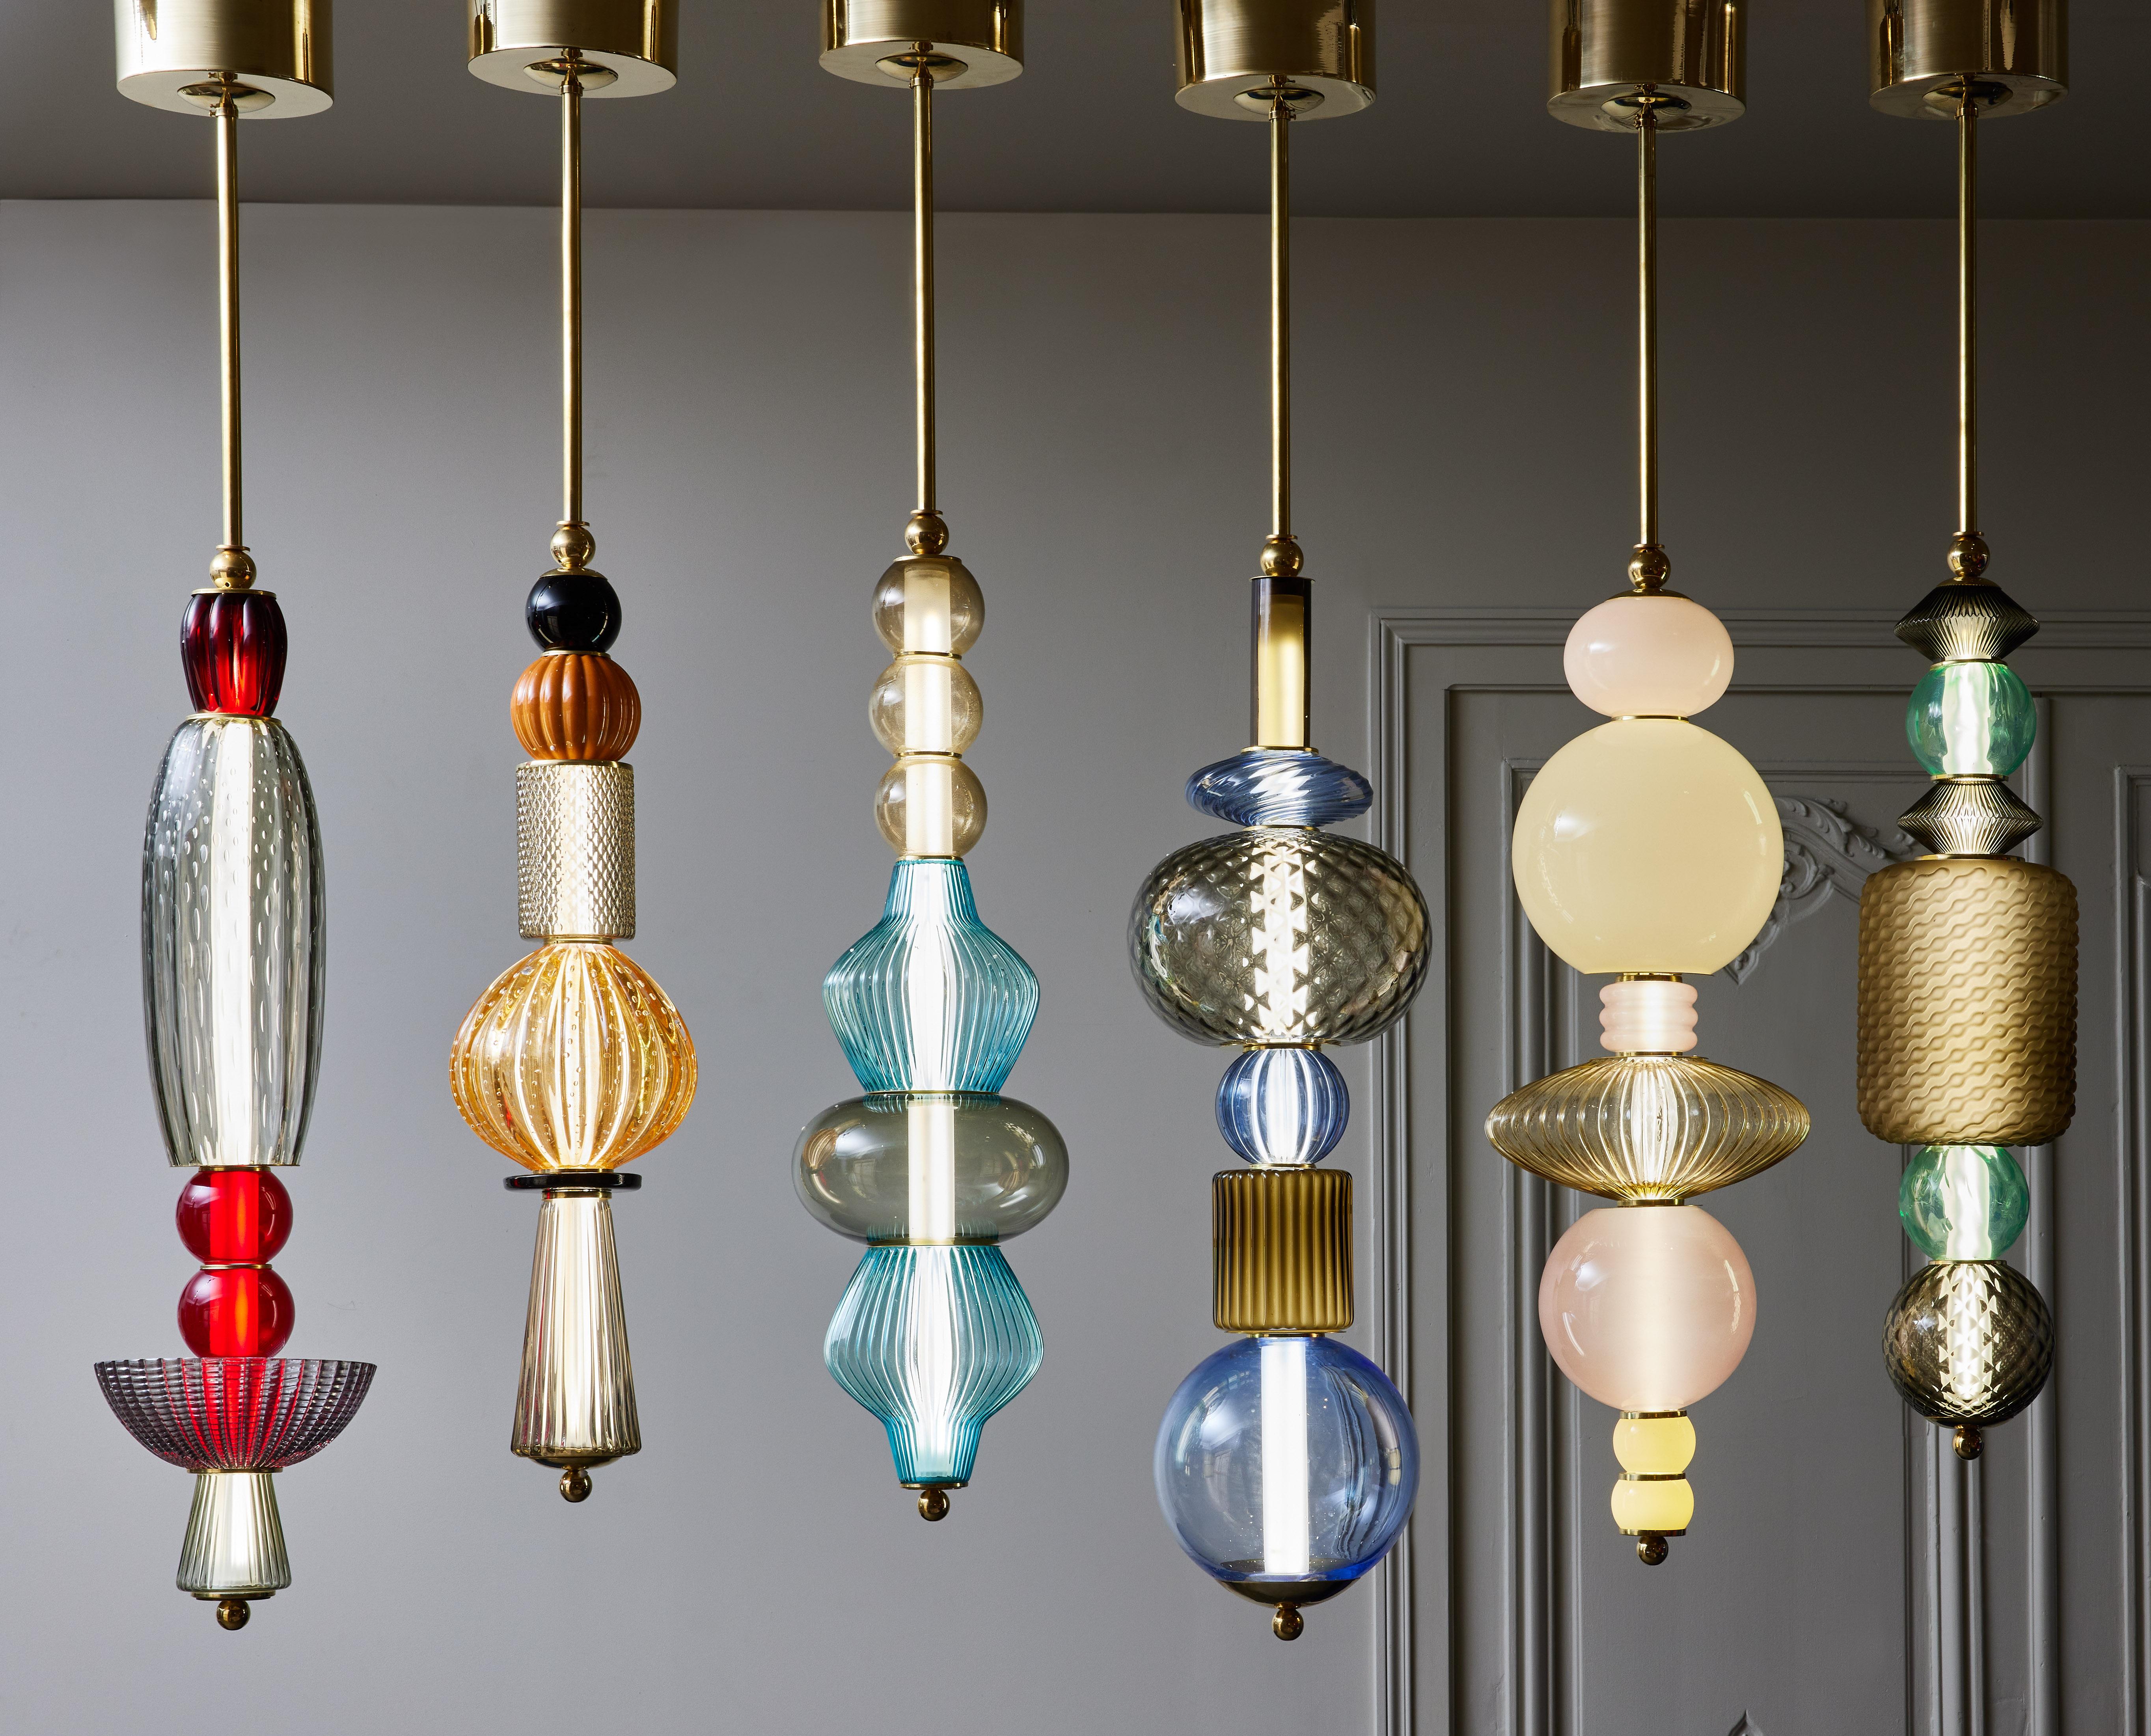 Using the same process as our totem floor lamps, we stacked different Murano glass parts in various colors and shapes, alternating with some brass discreet elements to make these playful suspensions.